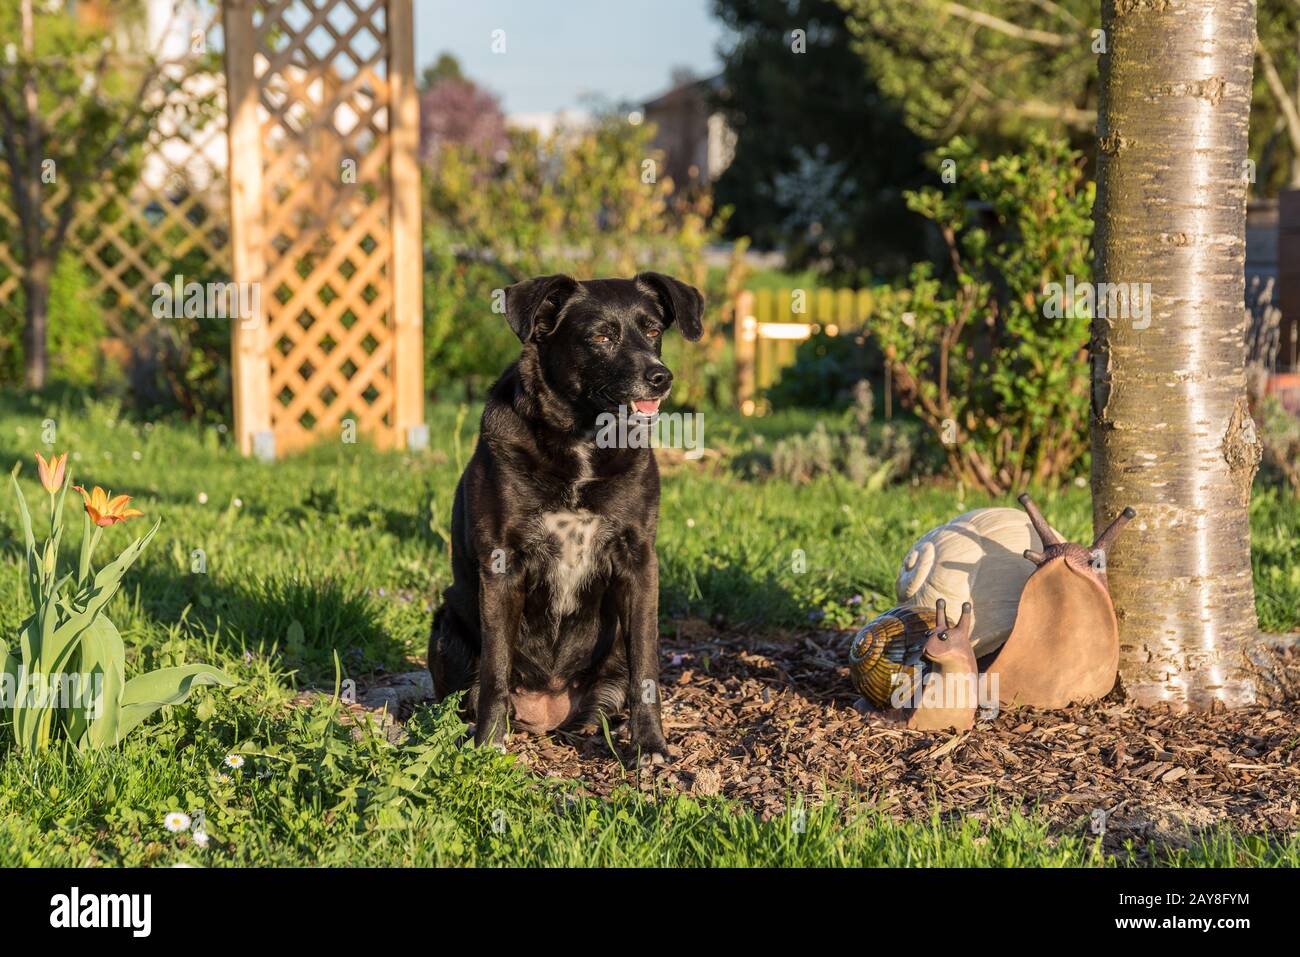 black dog sitting in the garden with decorative giant snails Stock Photo